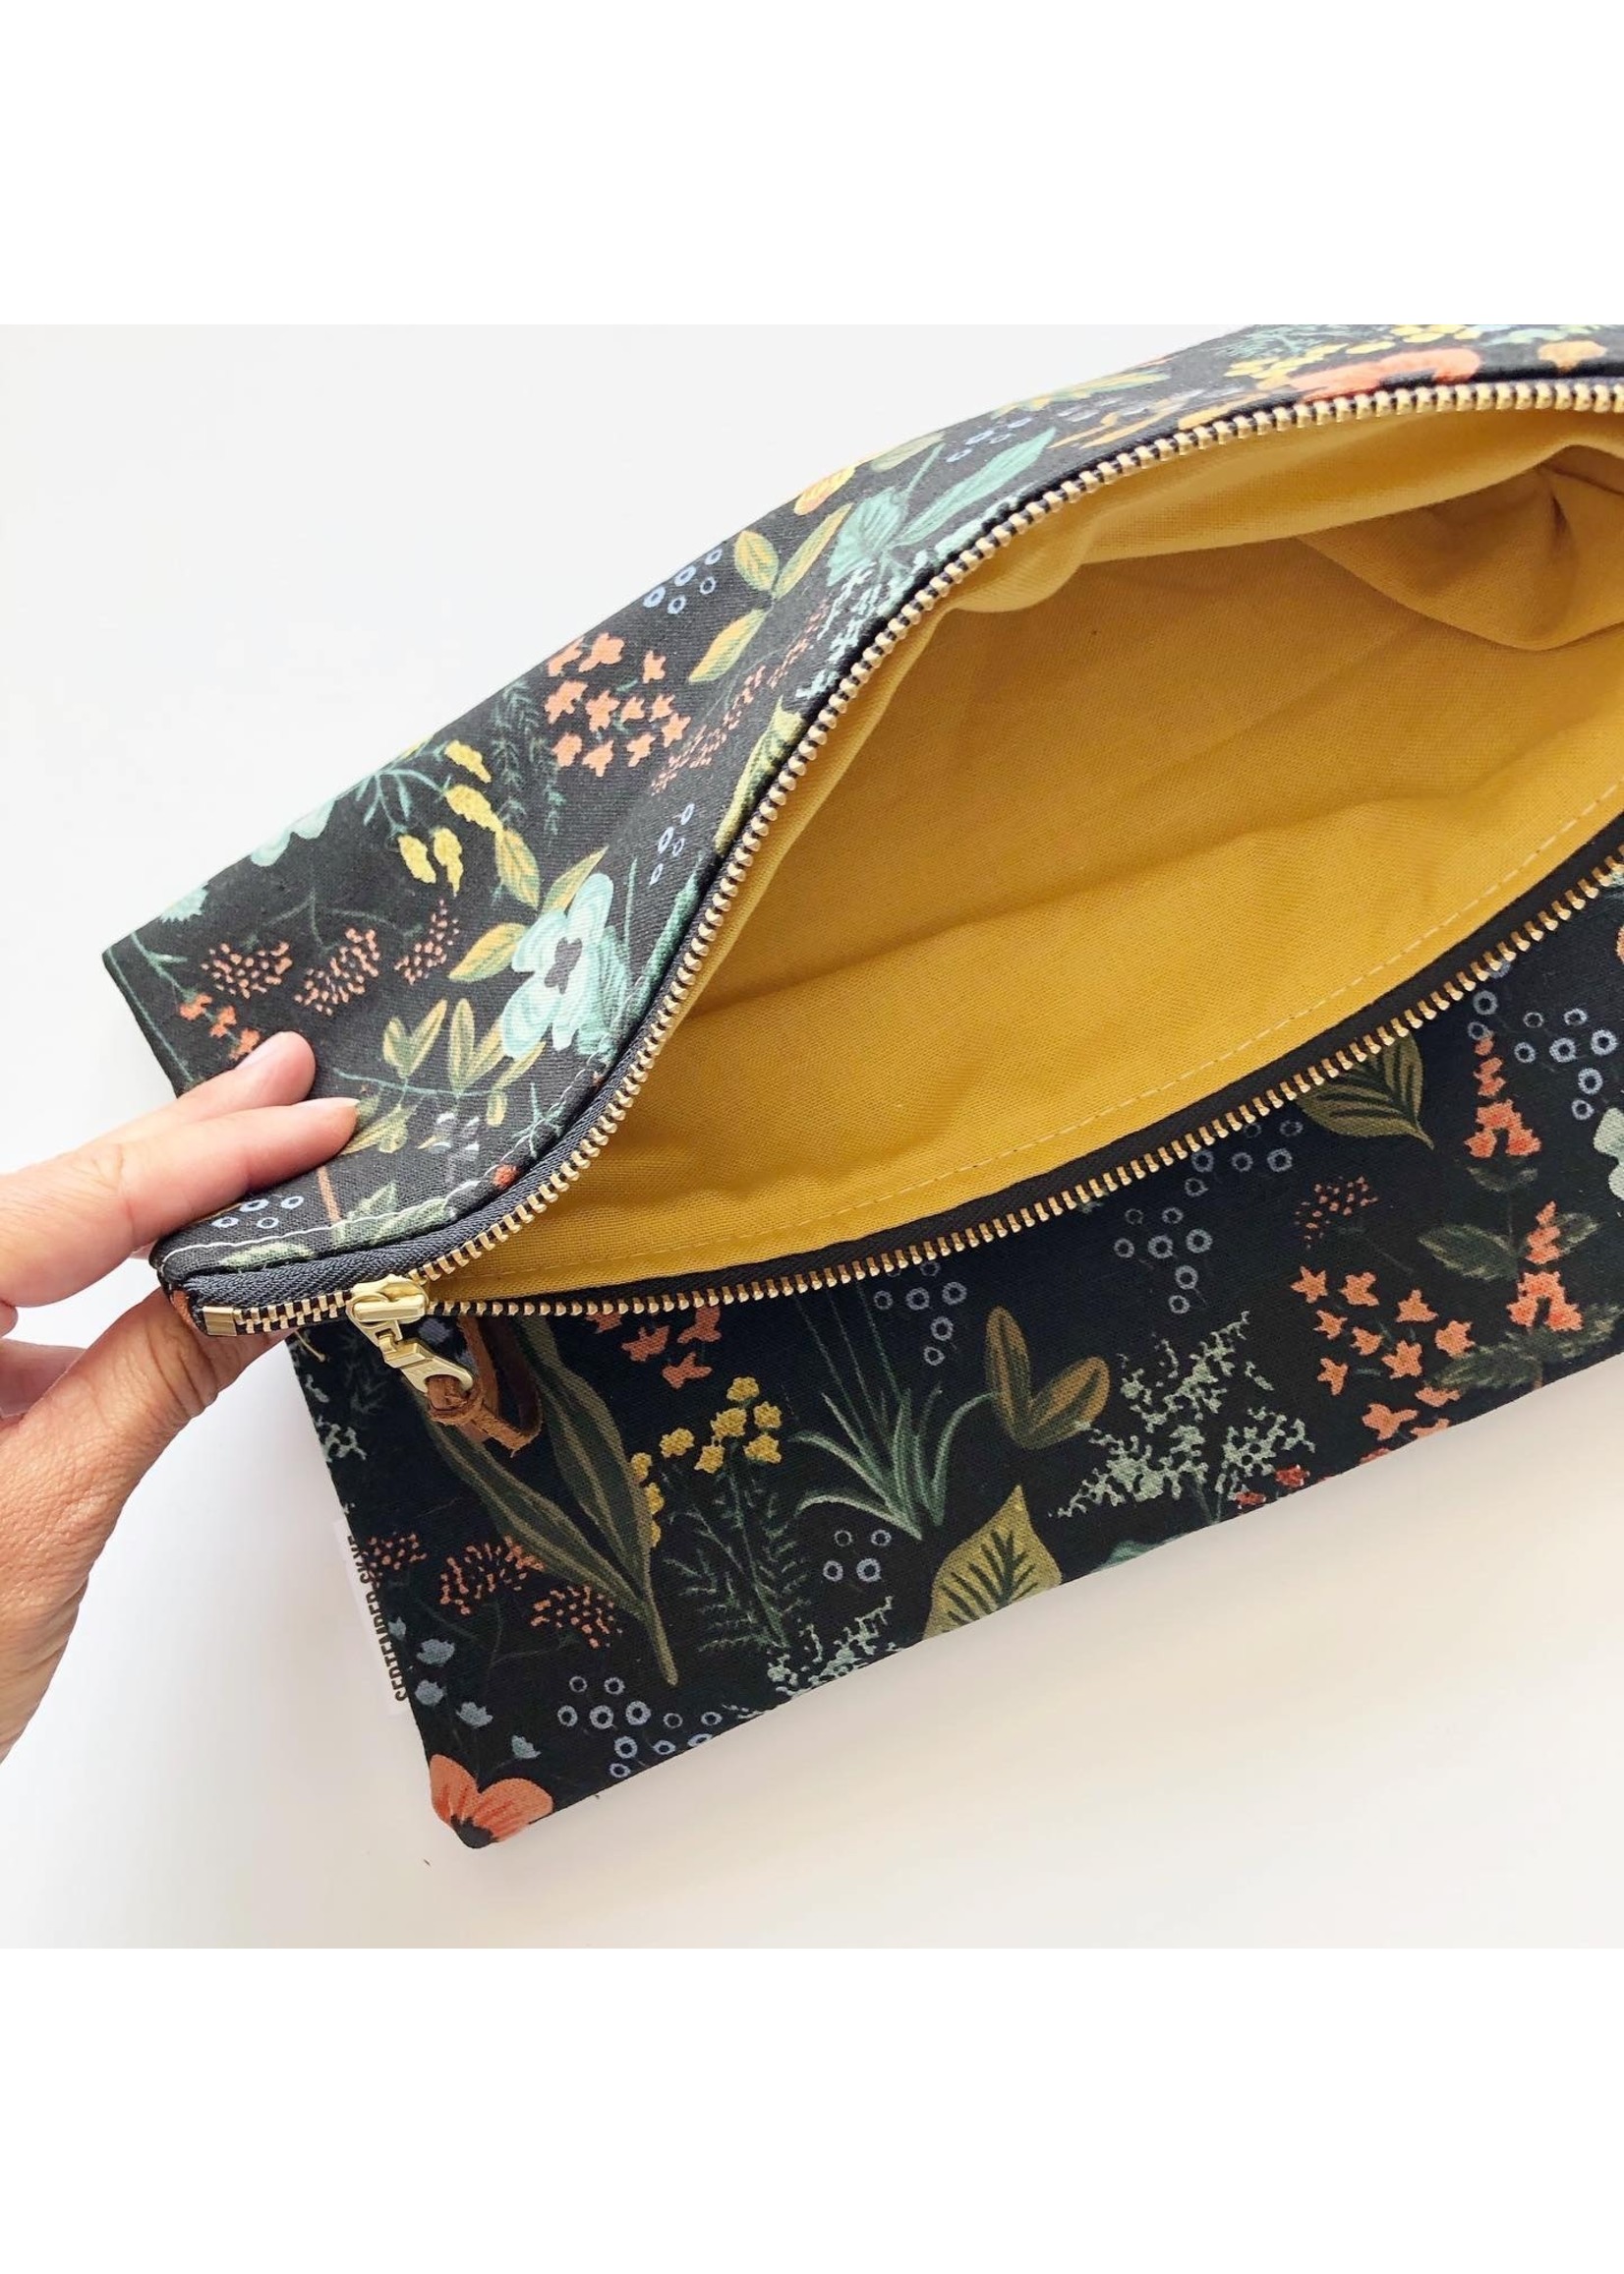 September Skye Bags & Accessories Fold Over Clutch